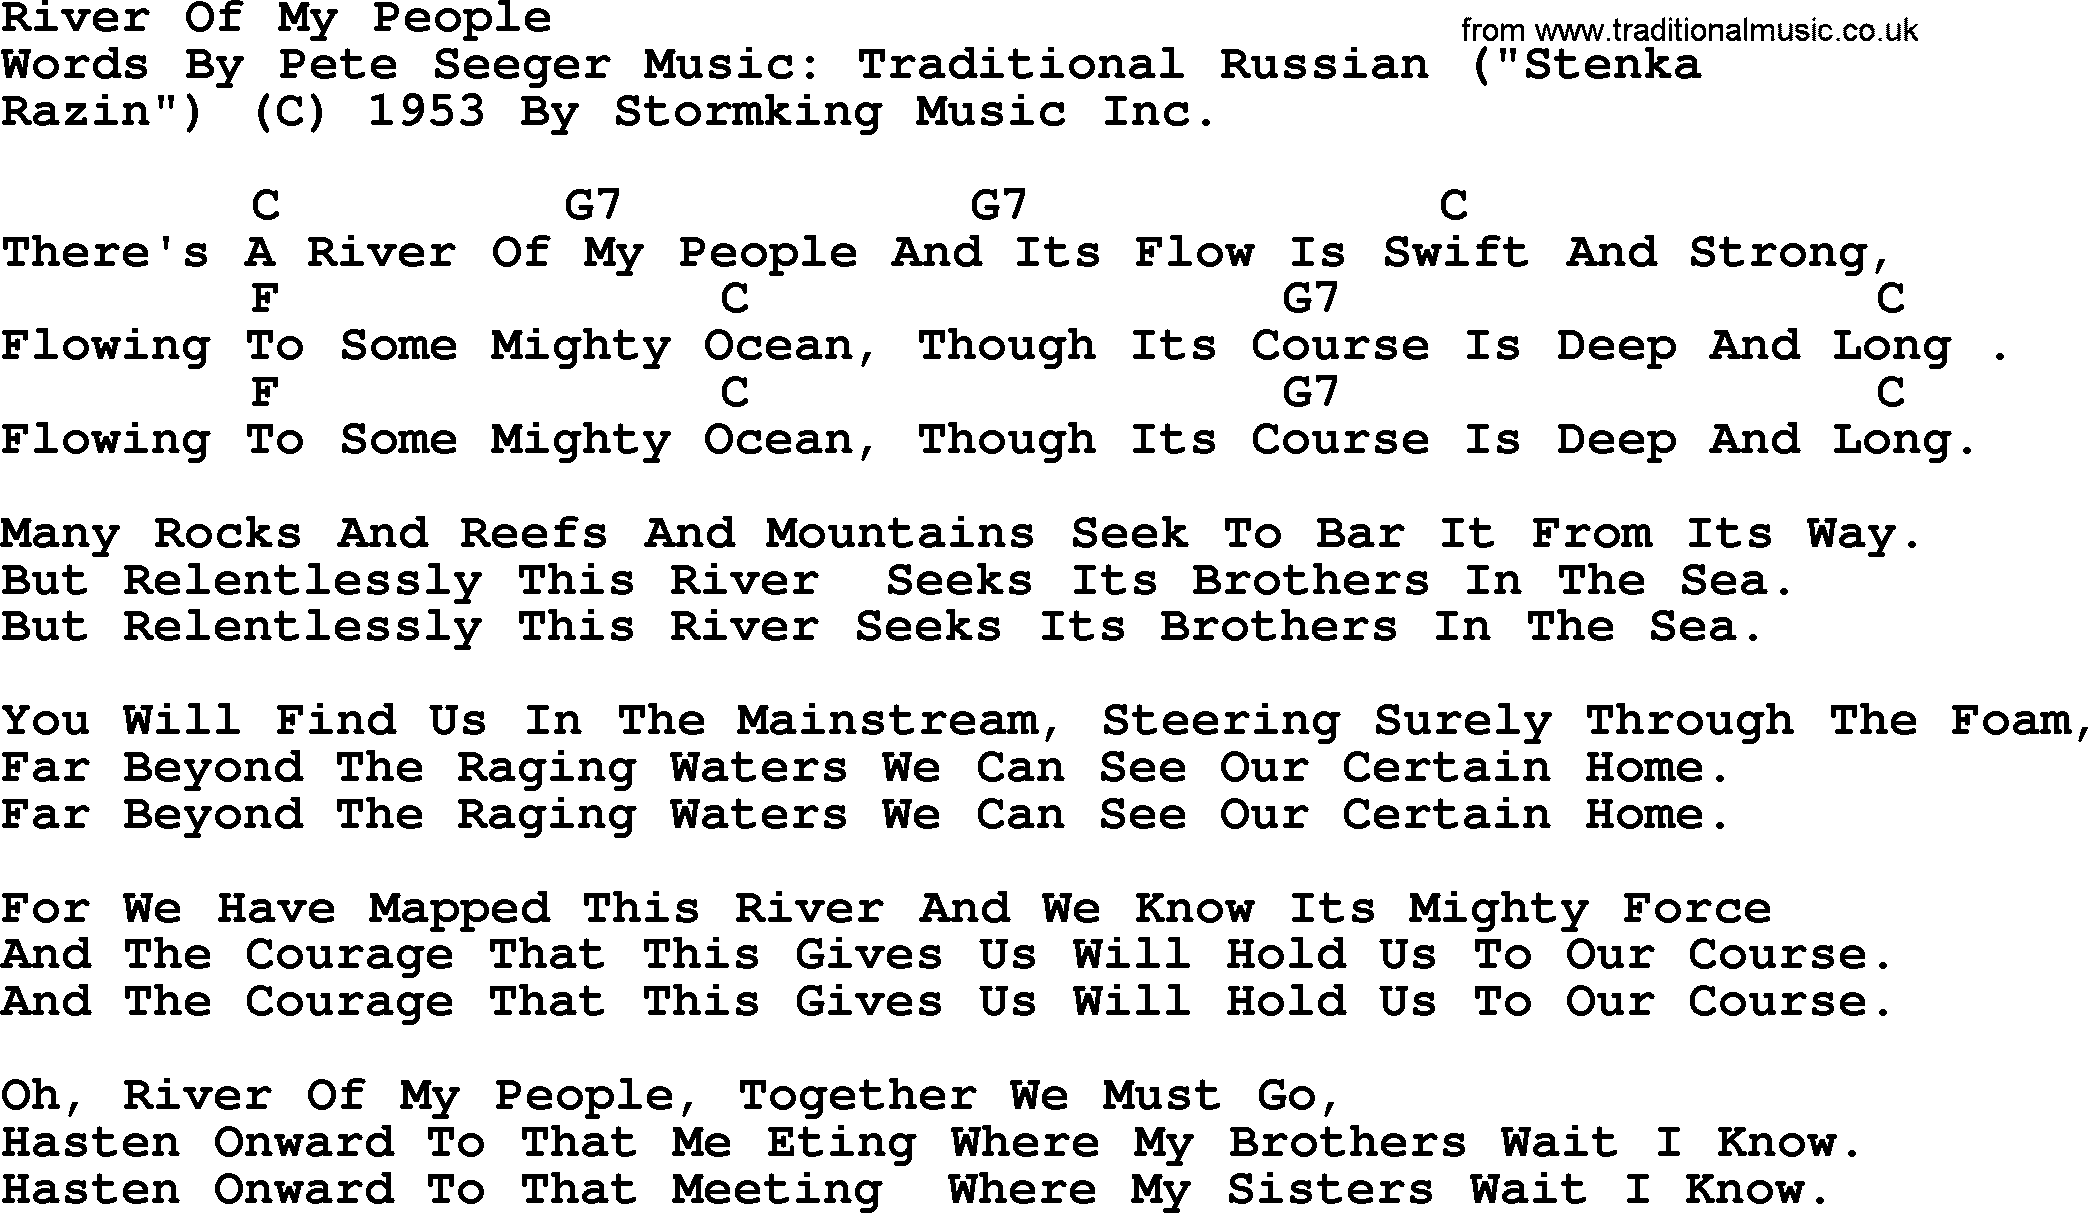 Pete Seeger song River Of My People, lyrics and chords